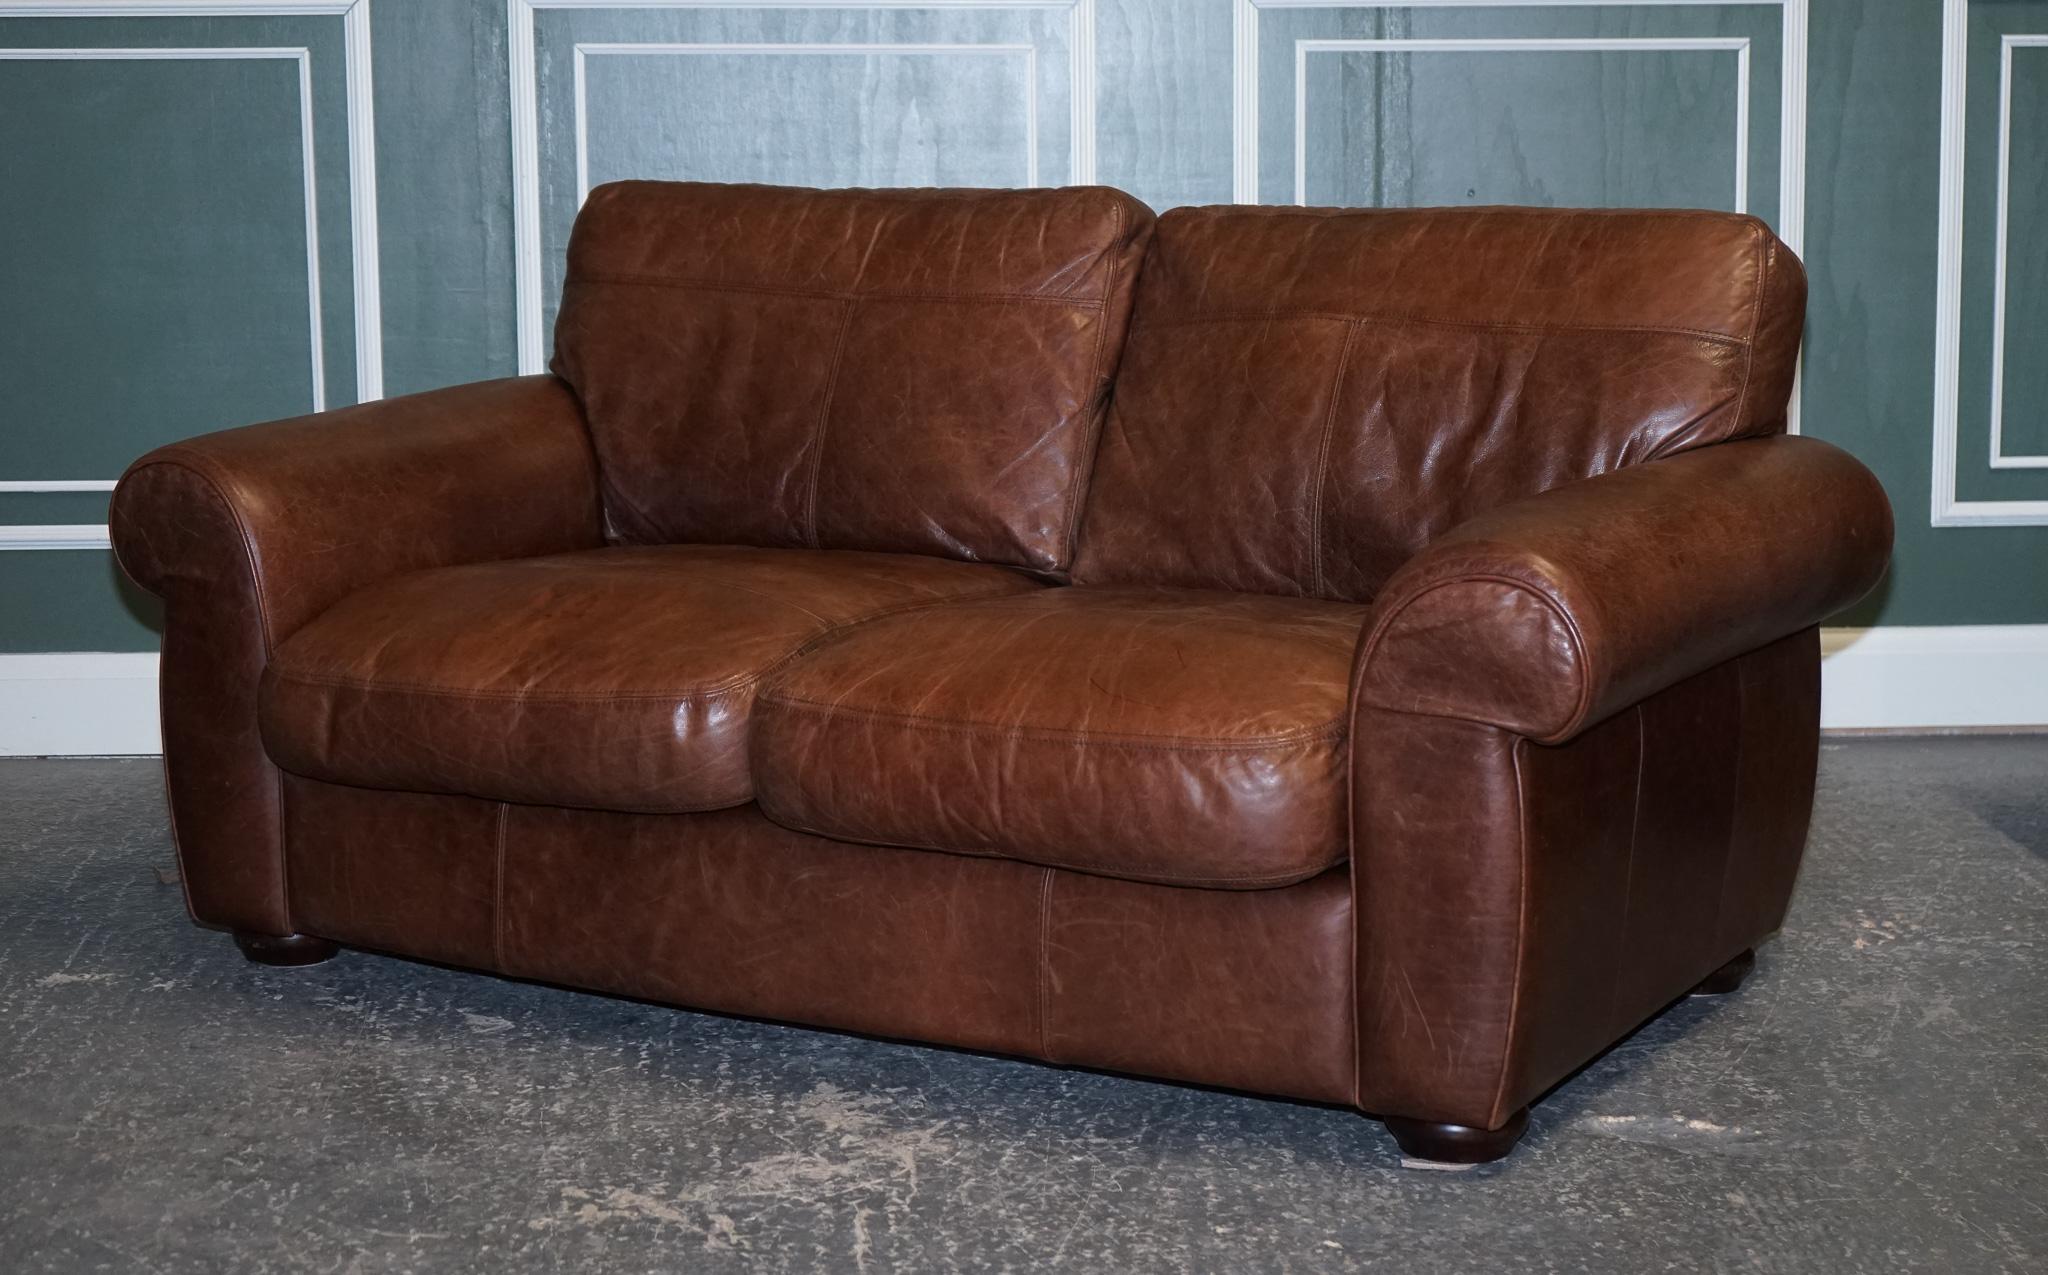 We are delighted to offer for sale this gorgeous brown leather saddle leather two seater sofa.

Excellent quality and solid frame built inside the sofa; cushions are still plump and have plenty of good use left. 

We have lightly restored this